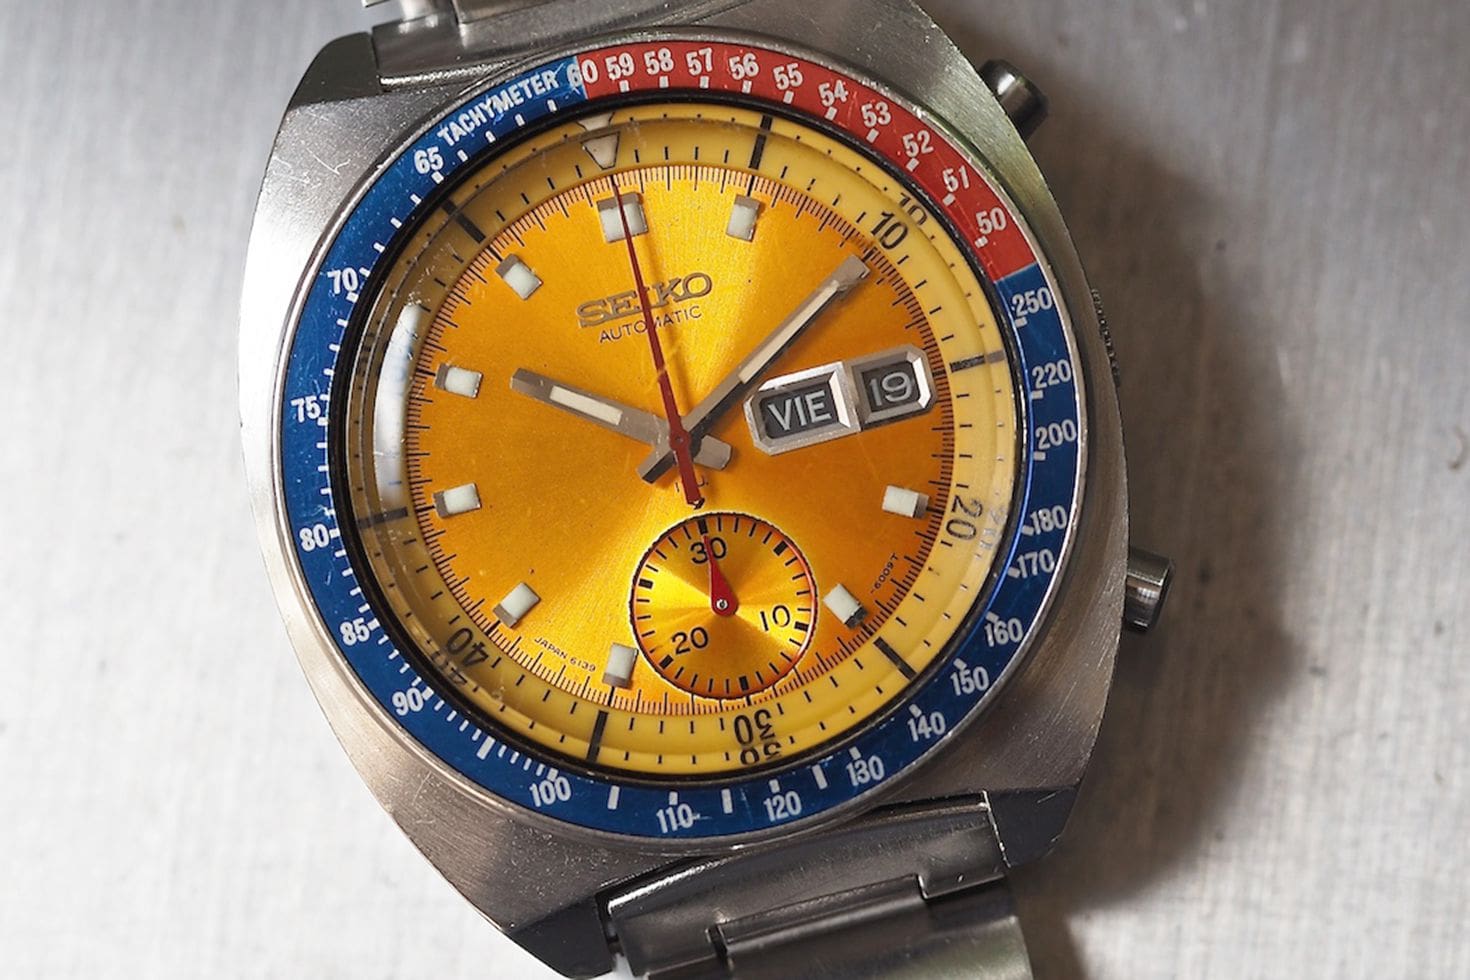 RECOMMENDED READING: Why Seiko won’t be producing a 50th anniversary chronograph